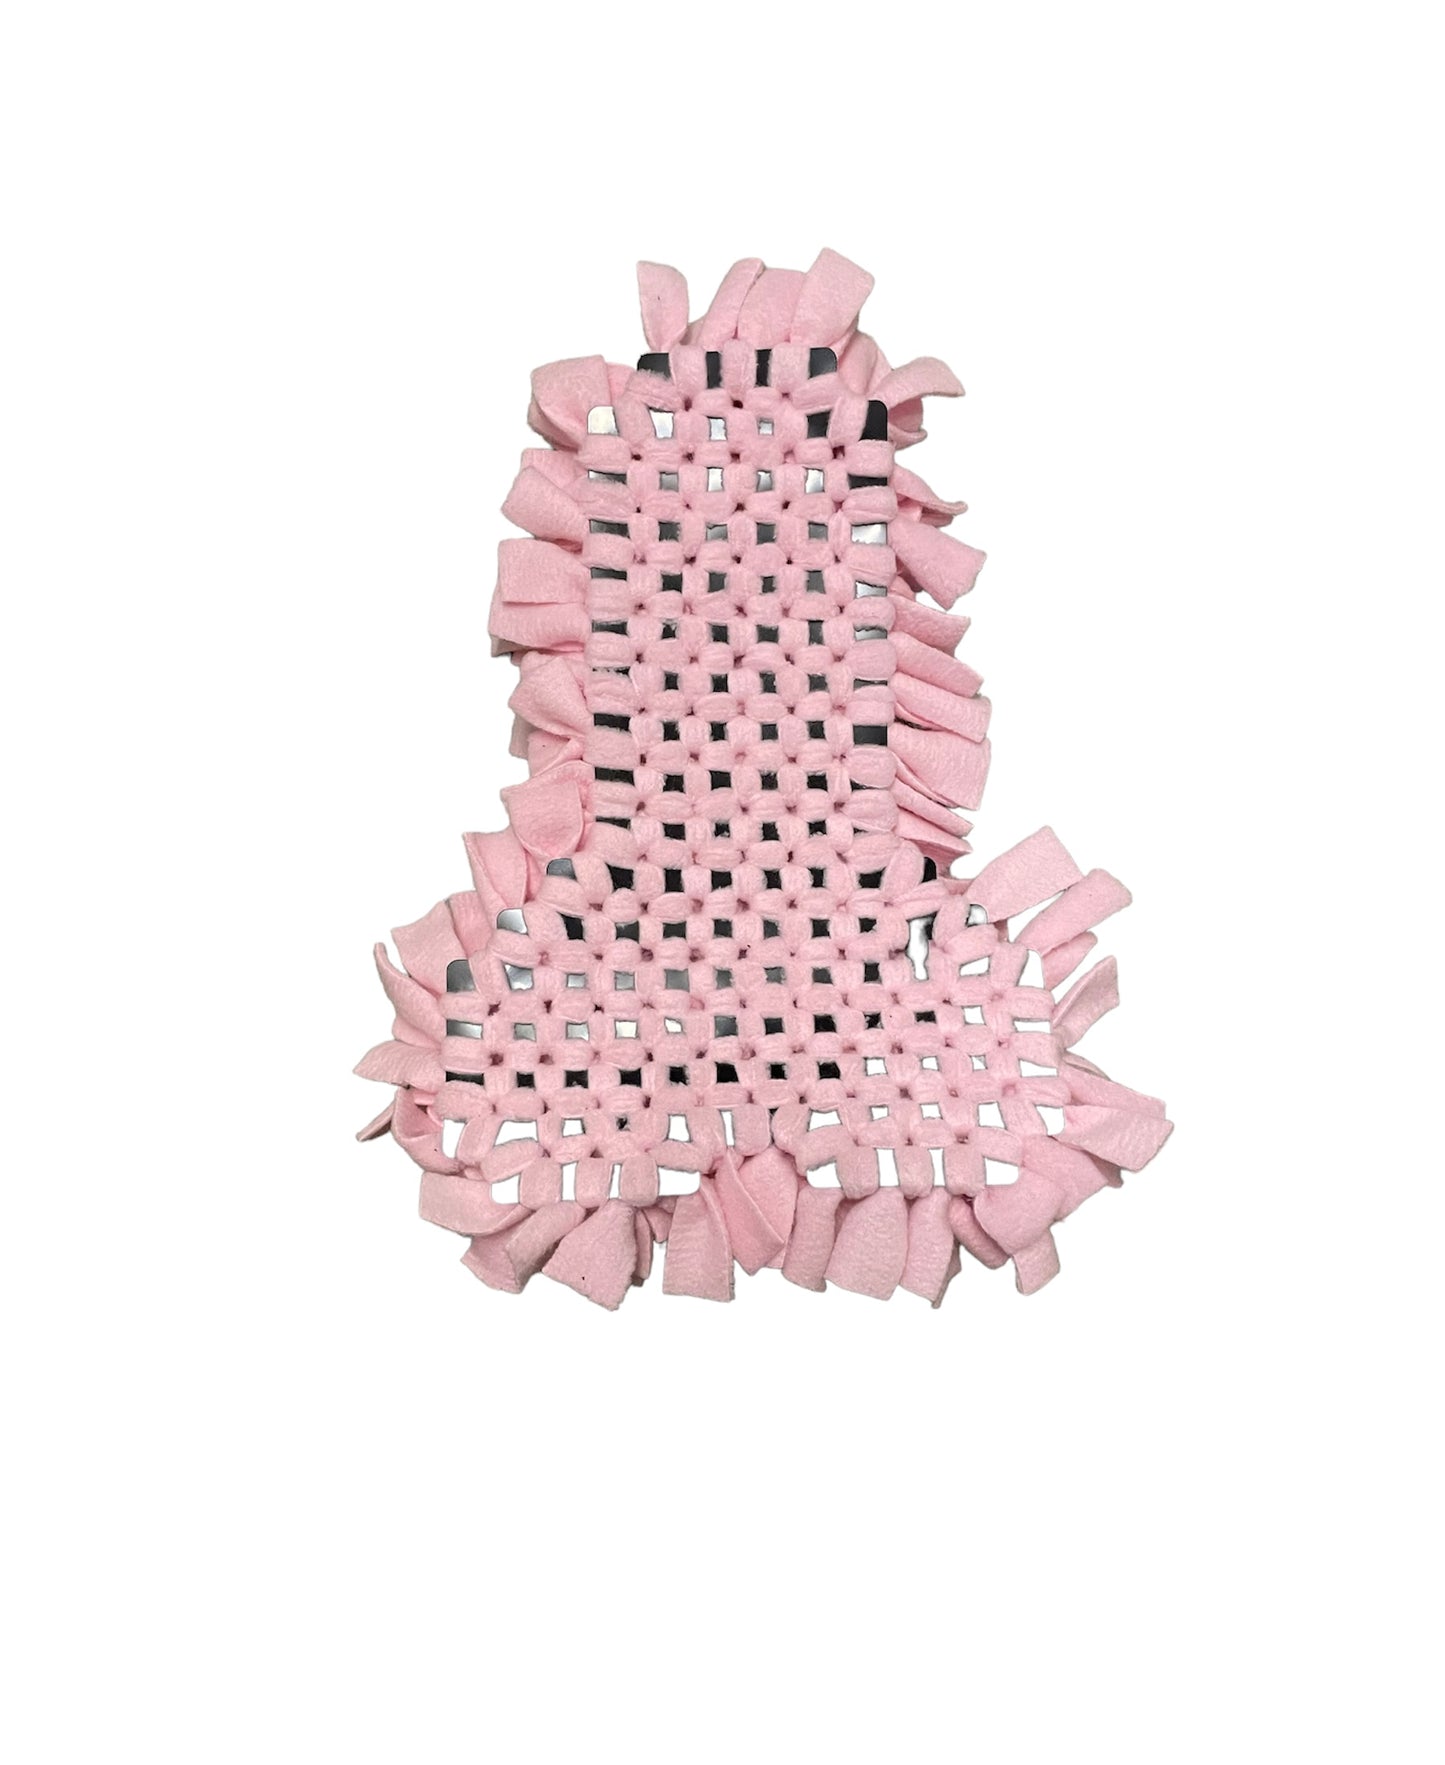 Snuffle mat ADULT Willy - light and dark skin tone dog toy